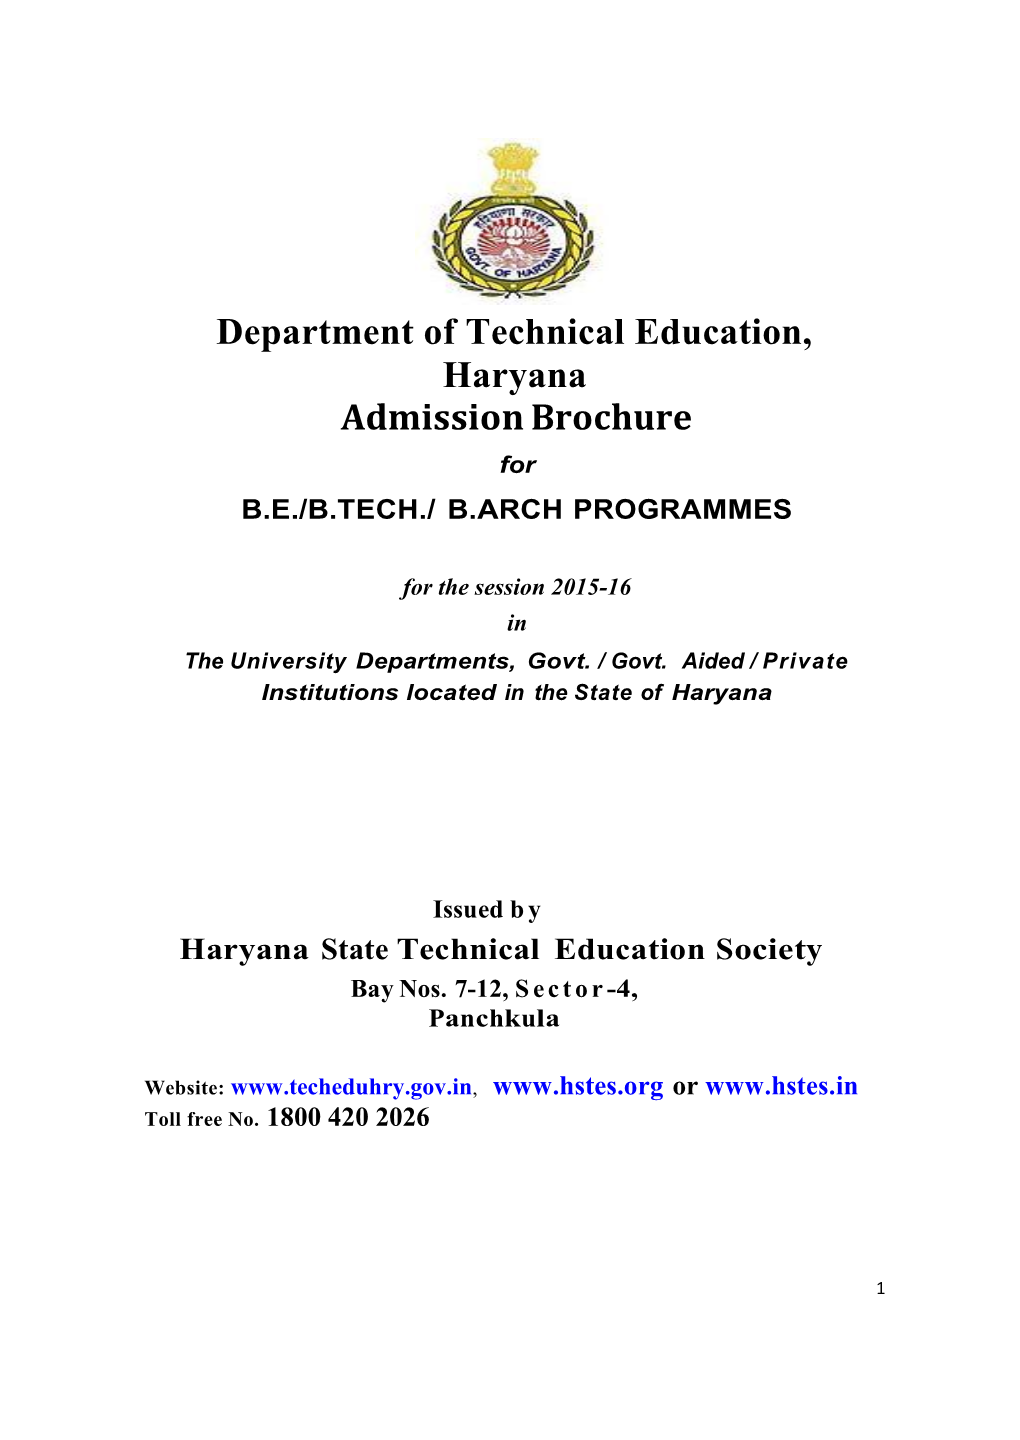 Department of Technical Education, Haryana Admission Brochure